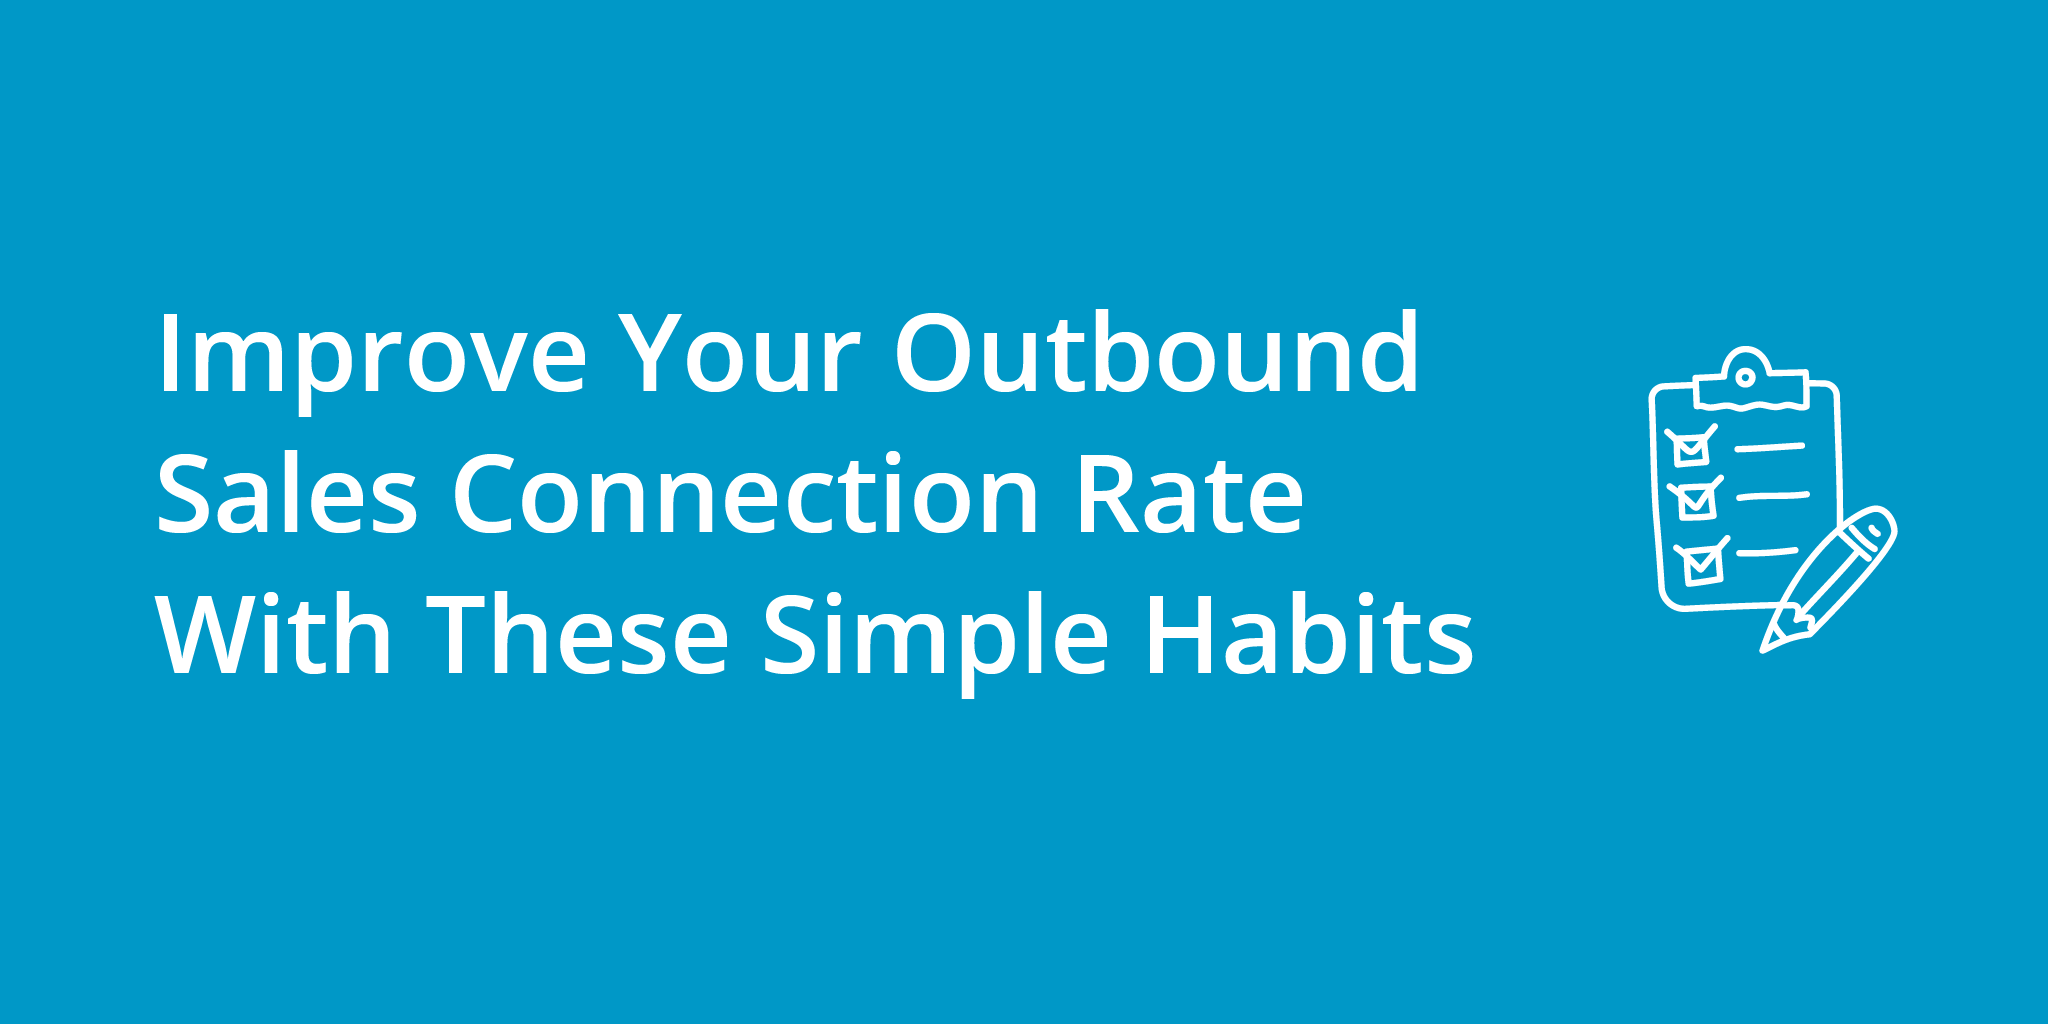 Improve Your Outbound Sales Connection Rate With These Simple Habits | Telephones for business